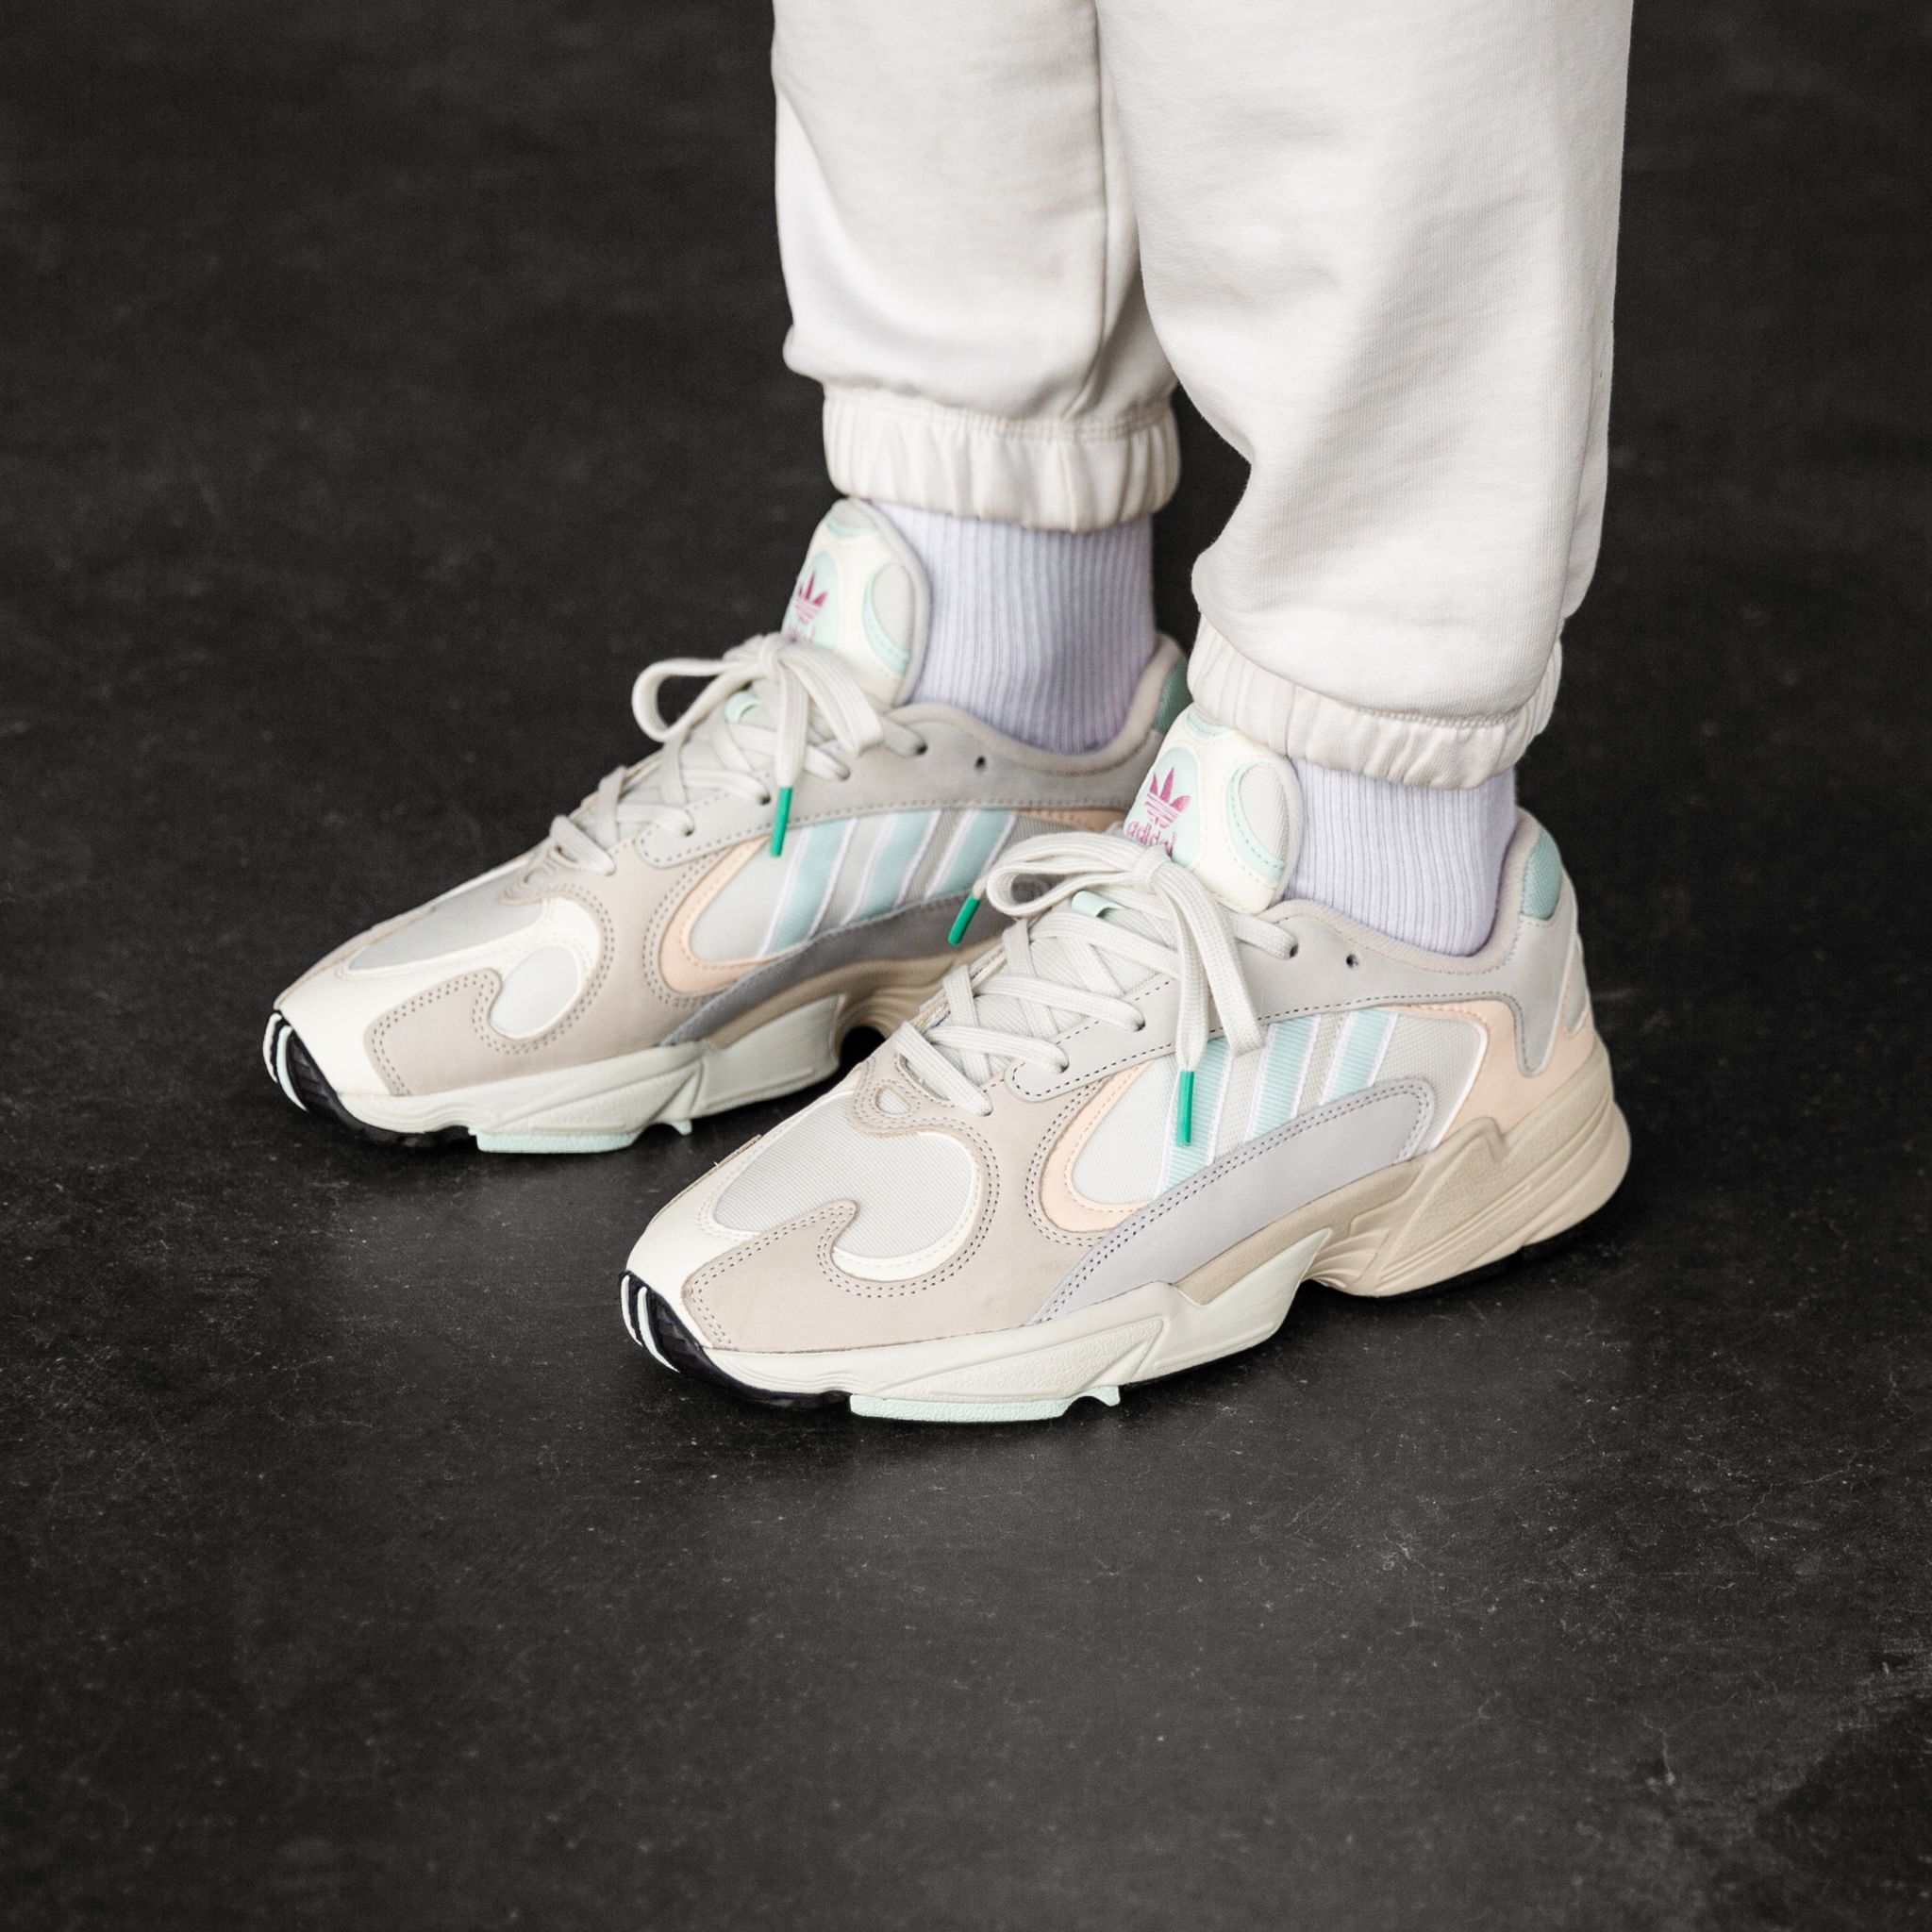 tempo pulmón inestable Titolo on Twitter: "NEW IN ! Adidas Yung-1 - Off White/Ice Mint/Ecrtin SHOP  HERE: https://t.co/FHEqmkkXKc https://t.co/hxbksmSmwV" / Twitter